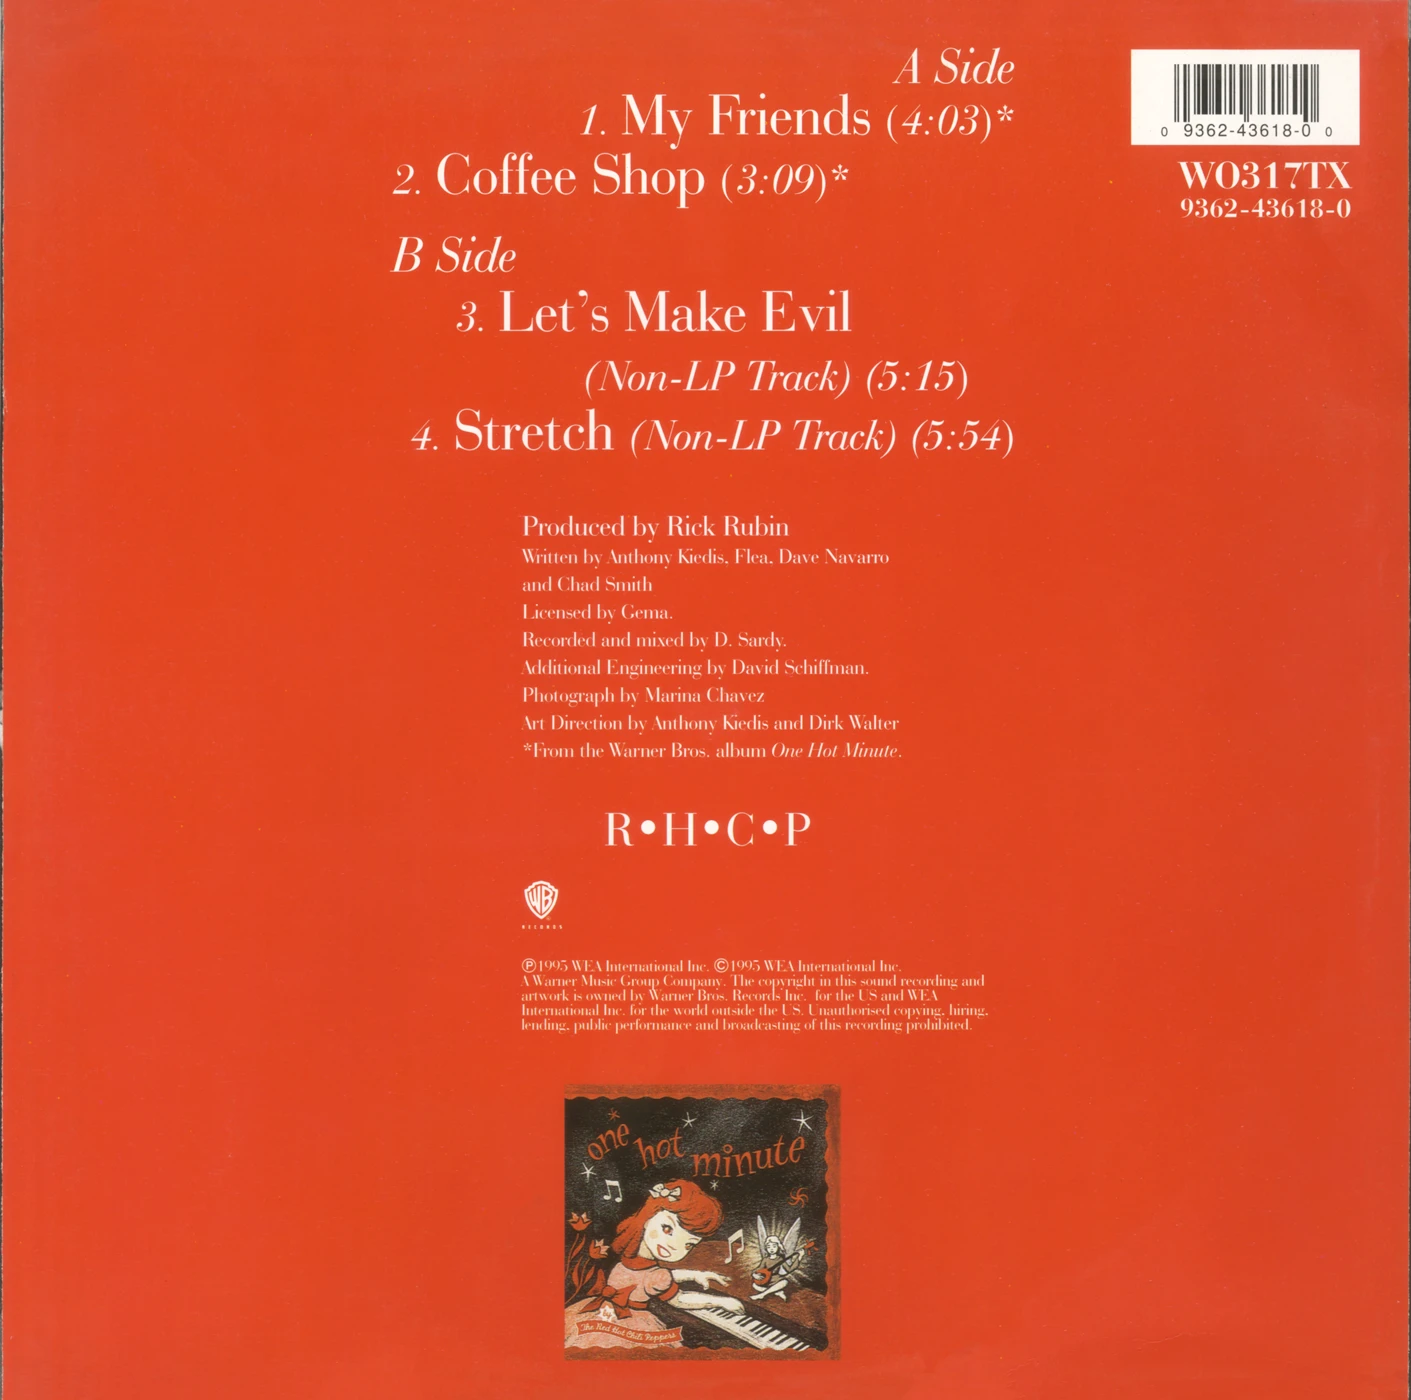 My Friends – Red Hot Chili Peppers back cover